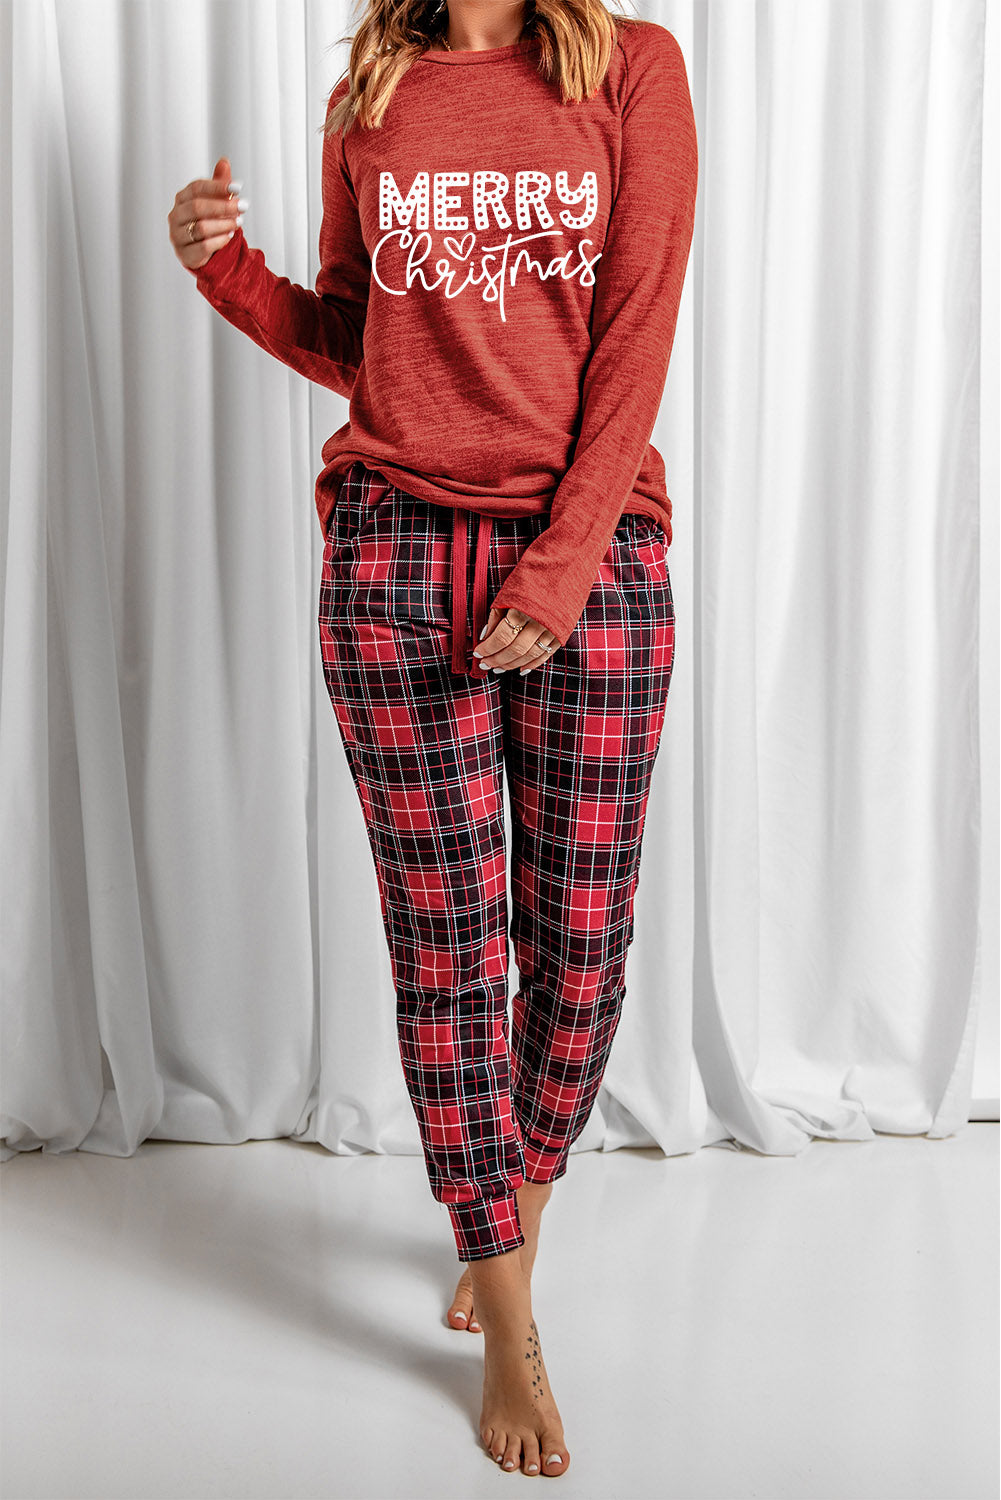 Red MERRY Christmas Graphic Top Plaid Pants Set